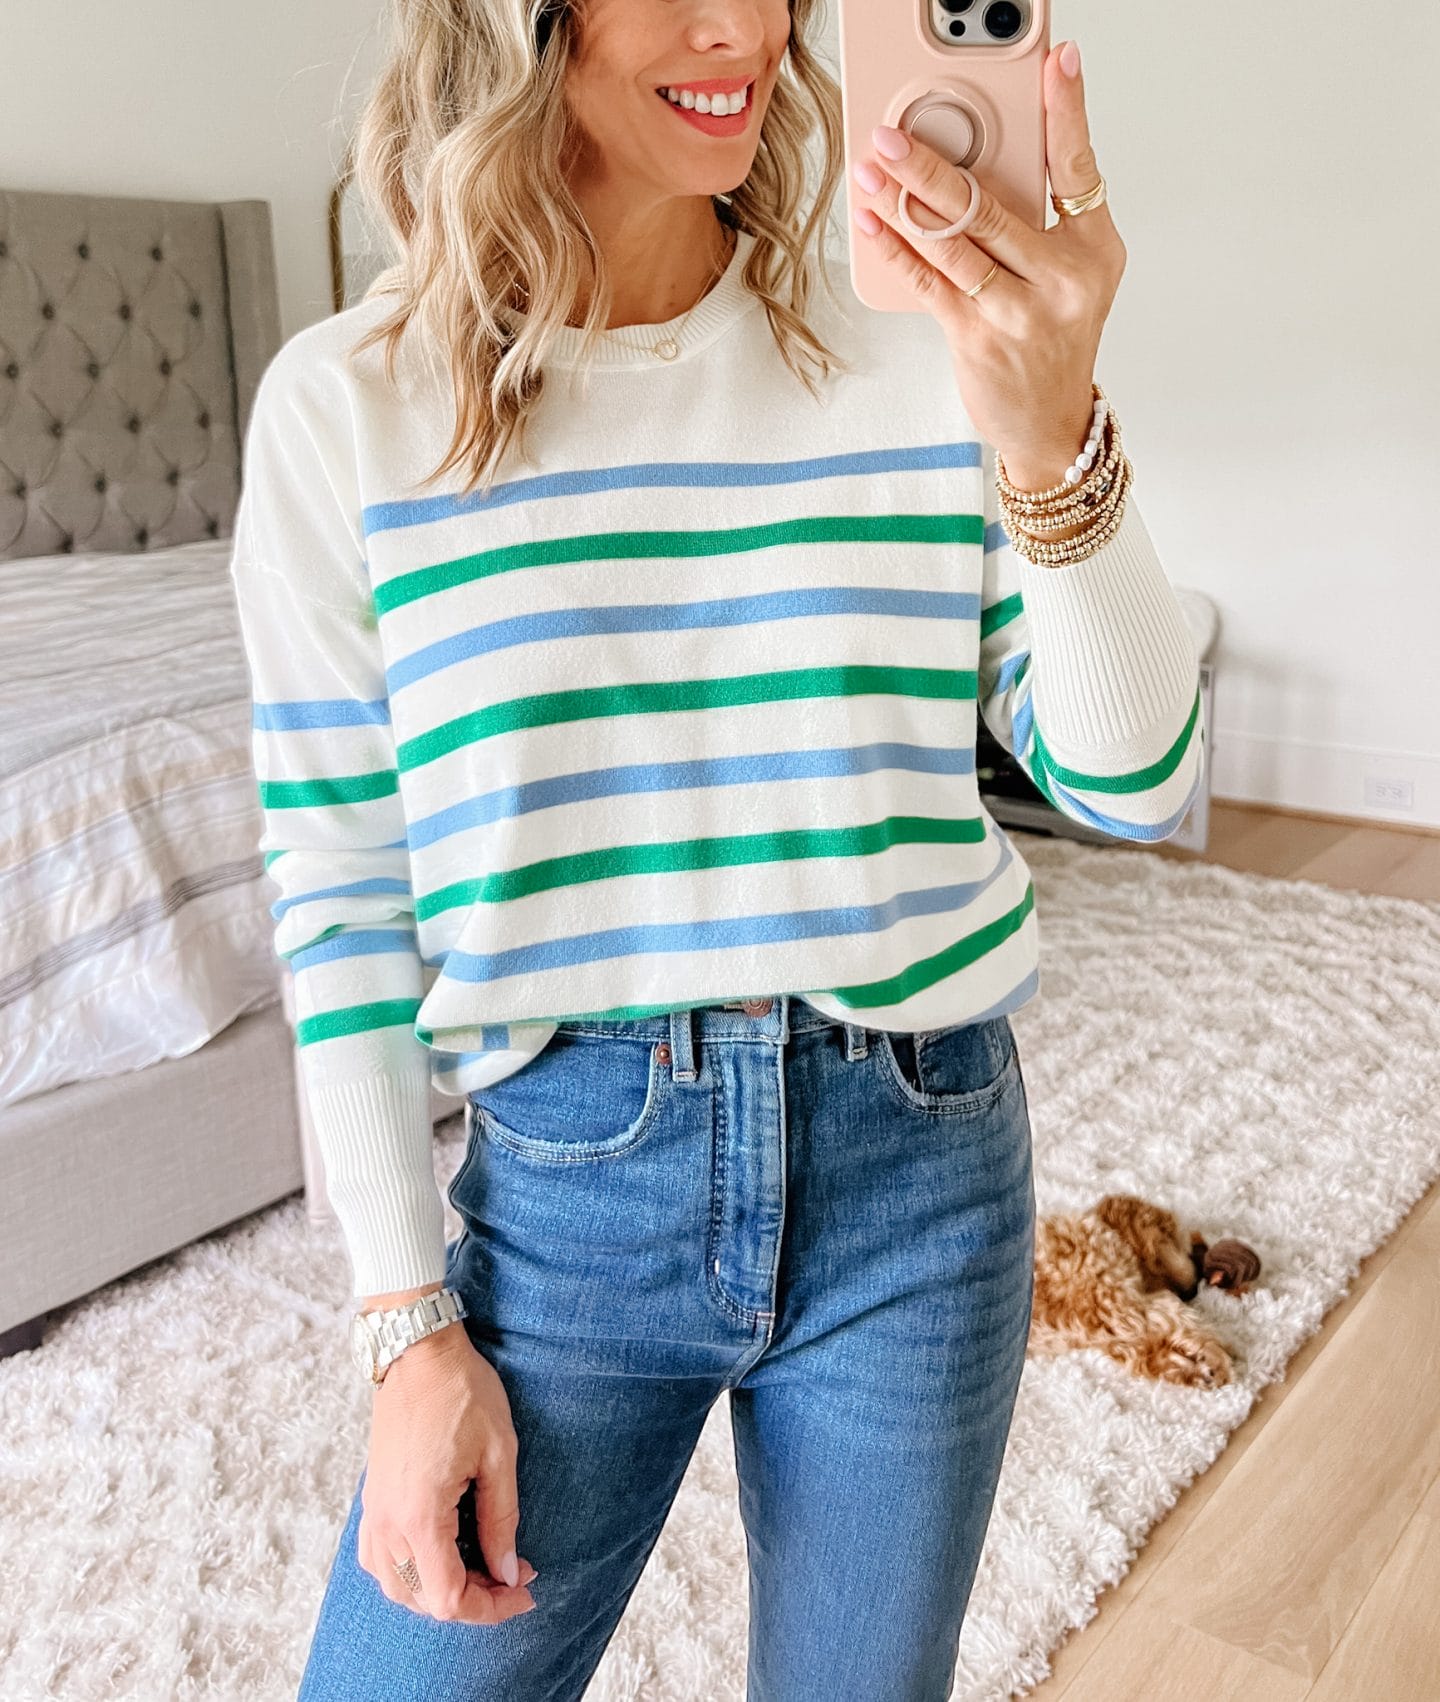 Striped Sweater, Jeans, Wedges 